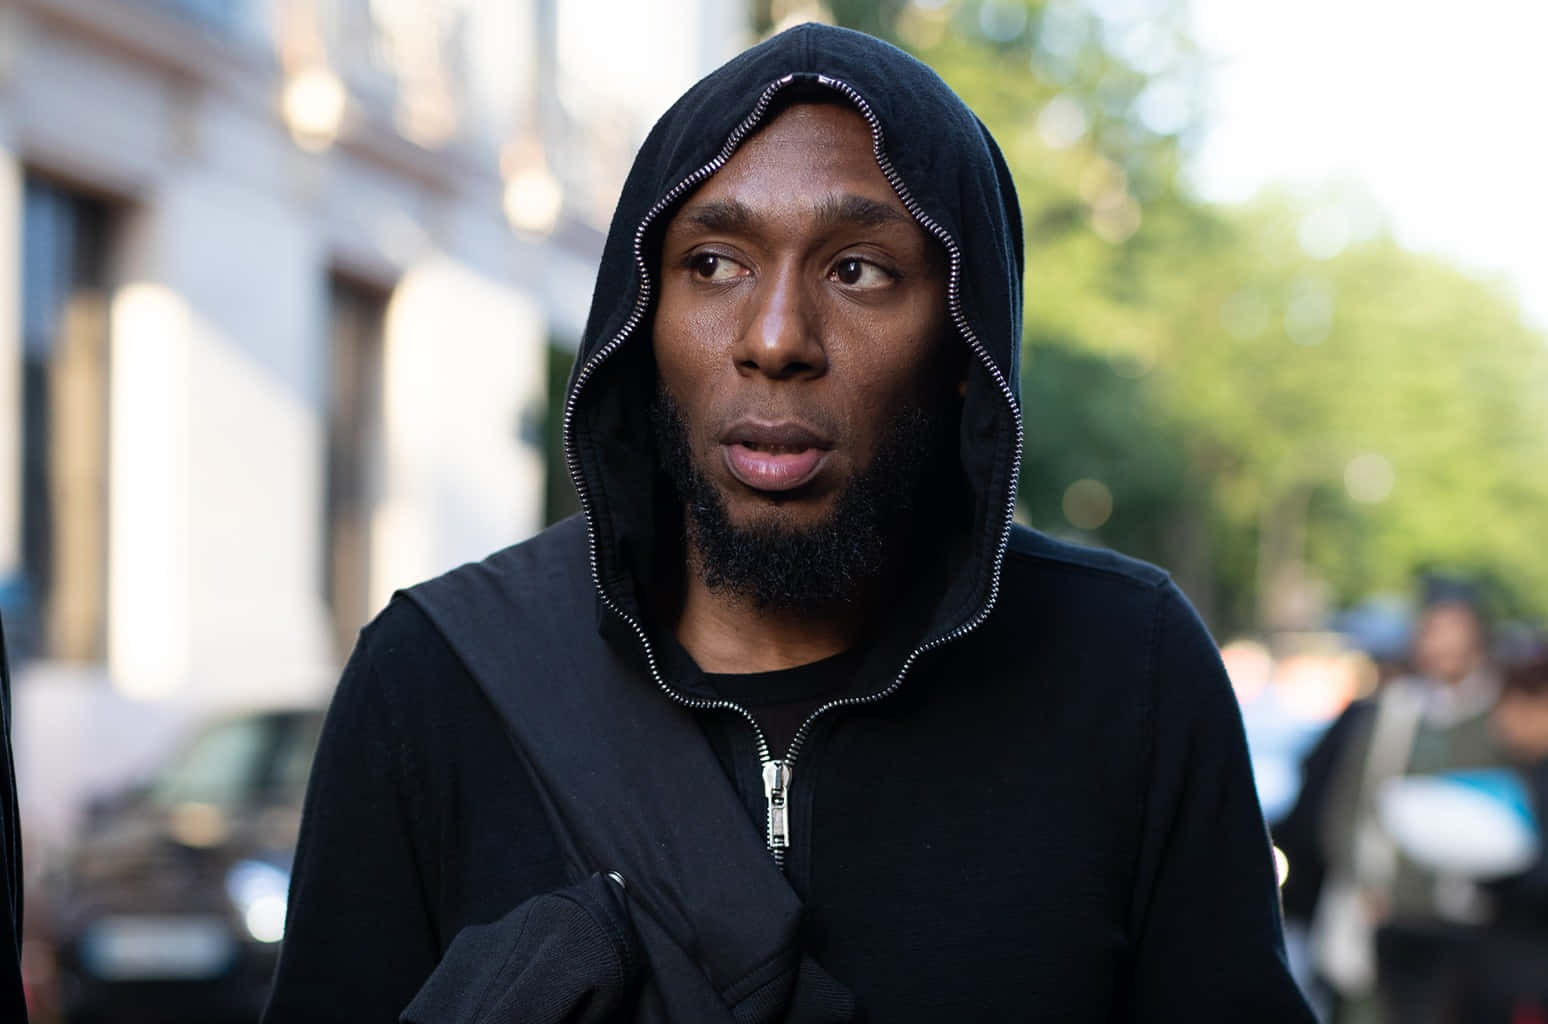 Yasiin Bey (Mos Def) On His Favorite Musicians, Chappelle & New Art